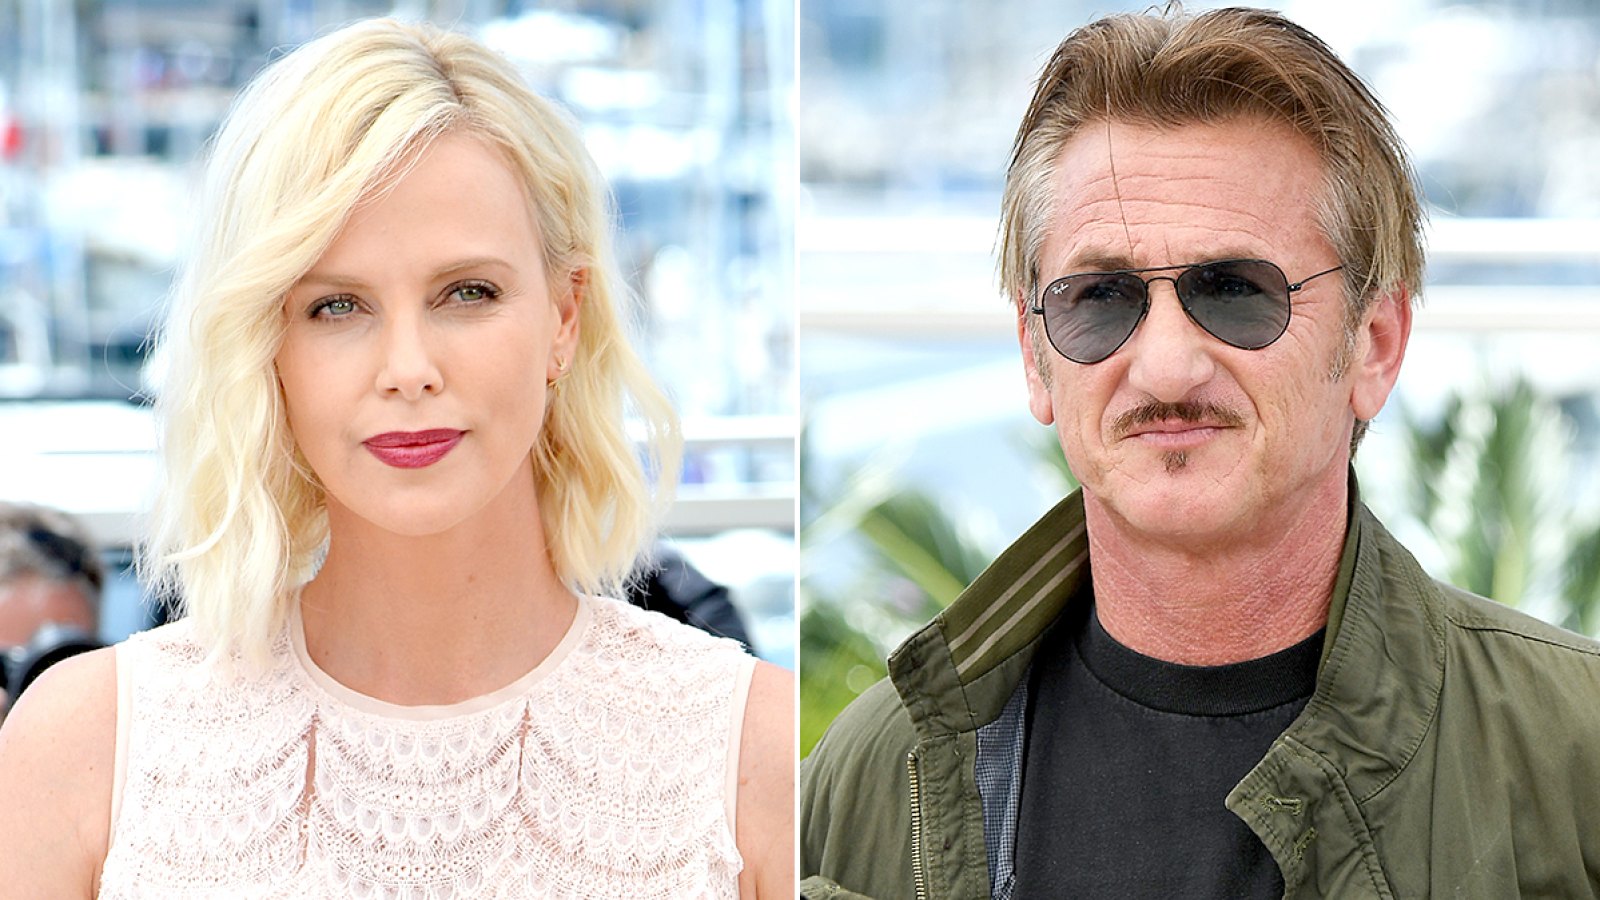 Sean Penn and Charlize Theron promote The Last Face together in Cannes, Celebrity News, Showbiz & TV